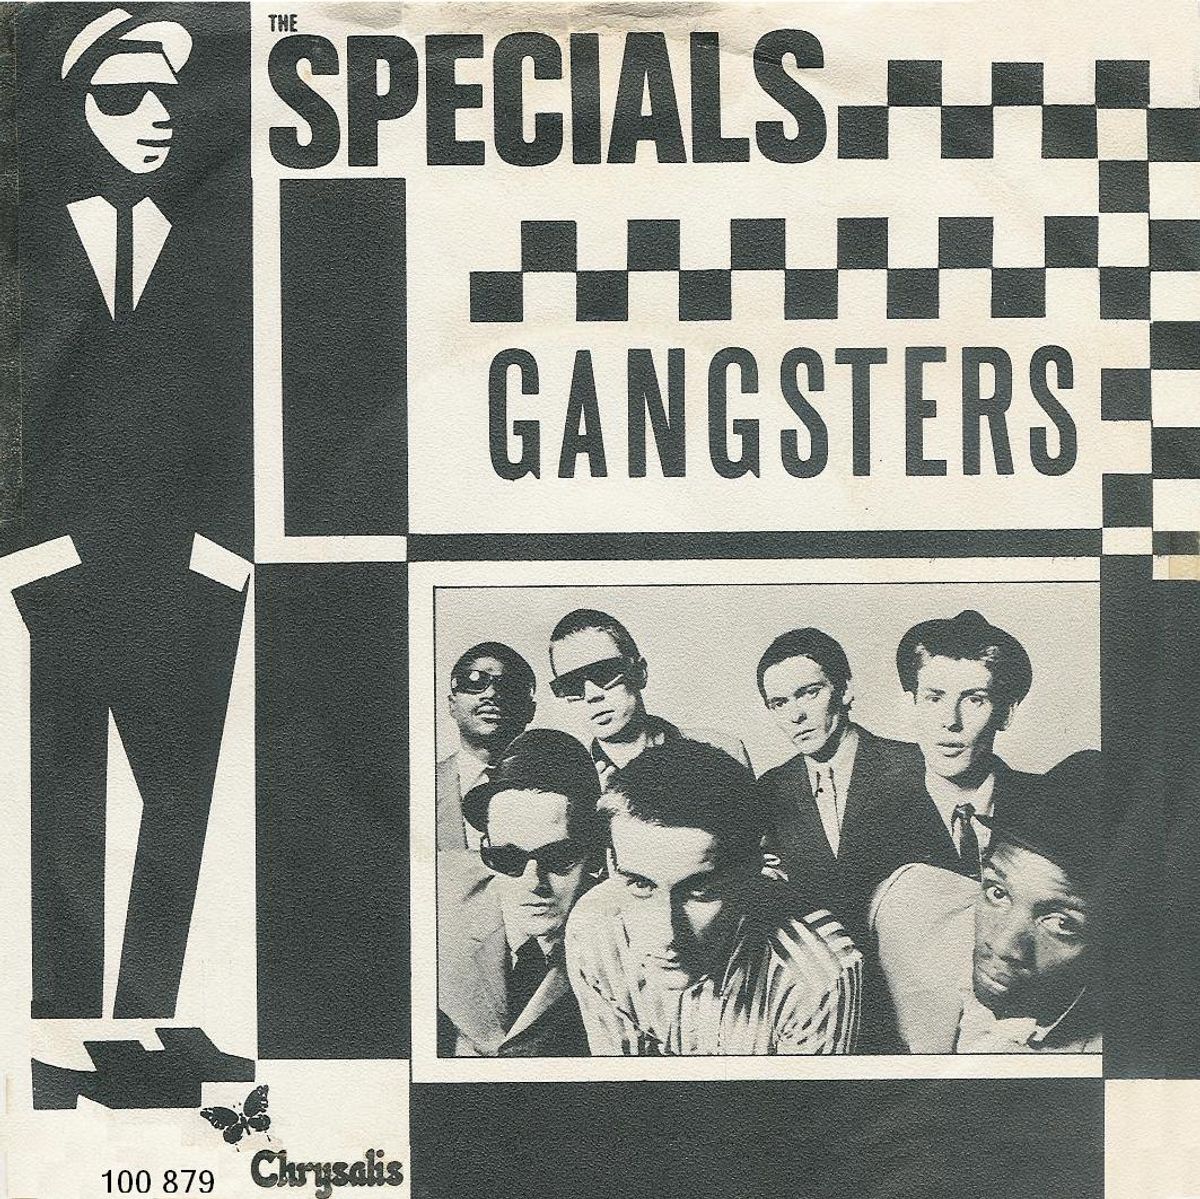 #RIPTerryHall - The Specials - Gangsters (1979)